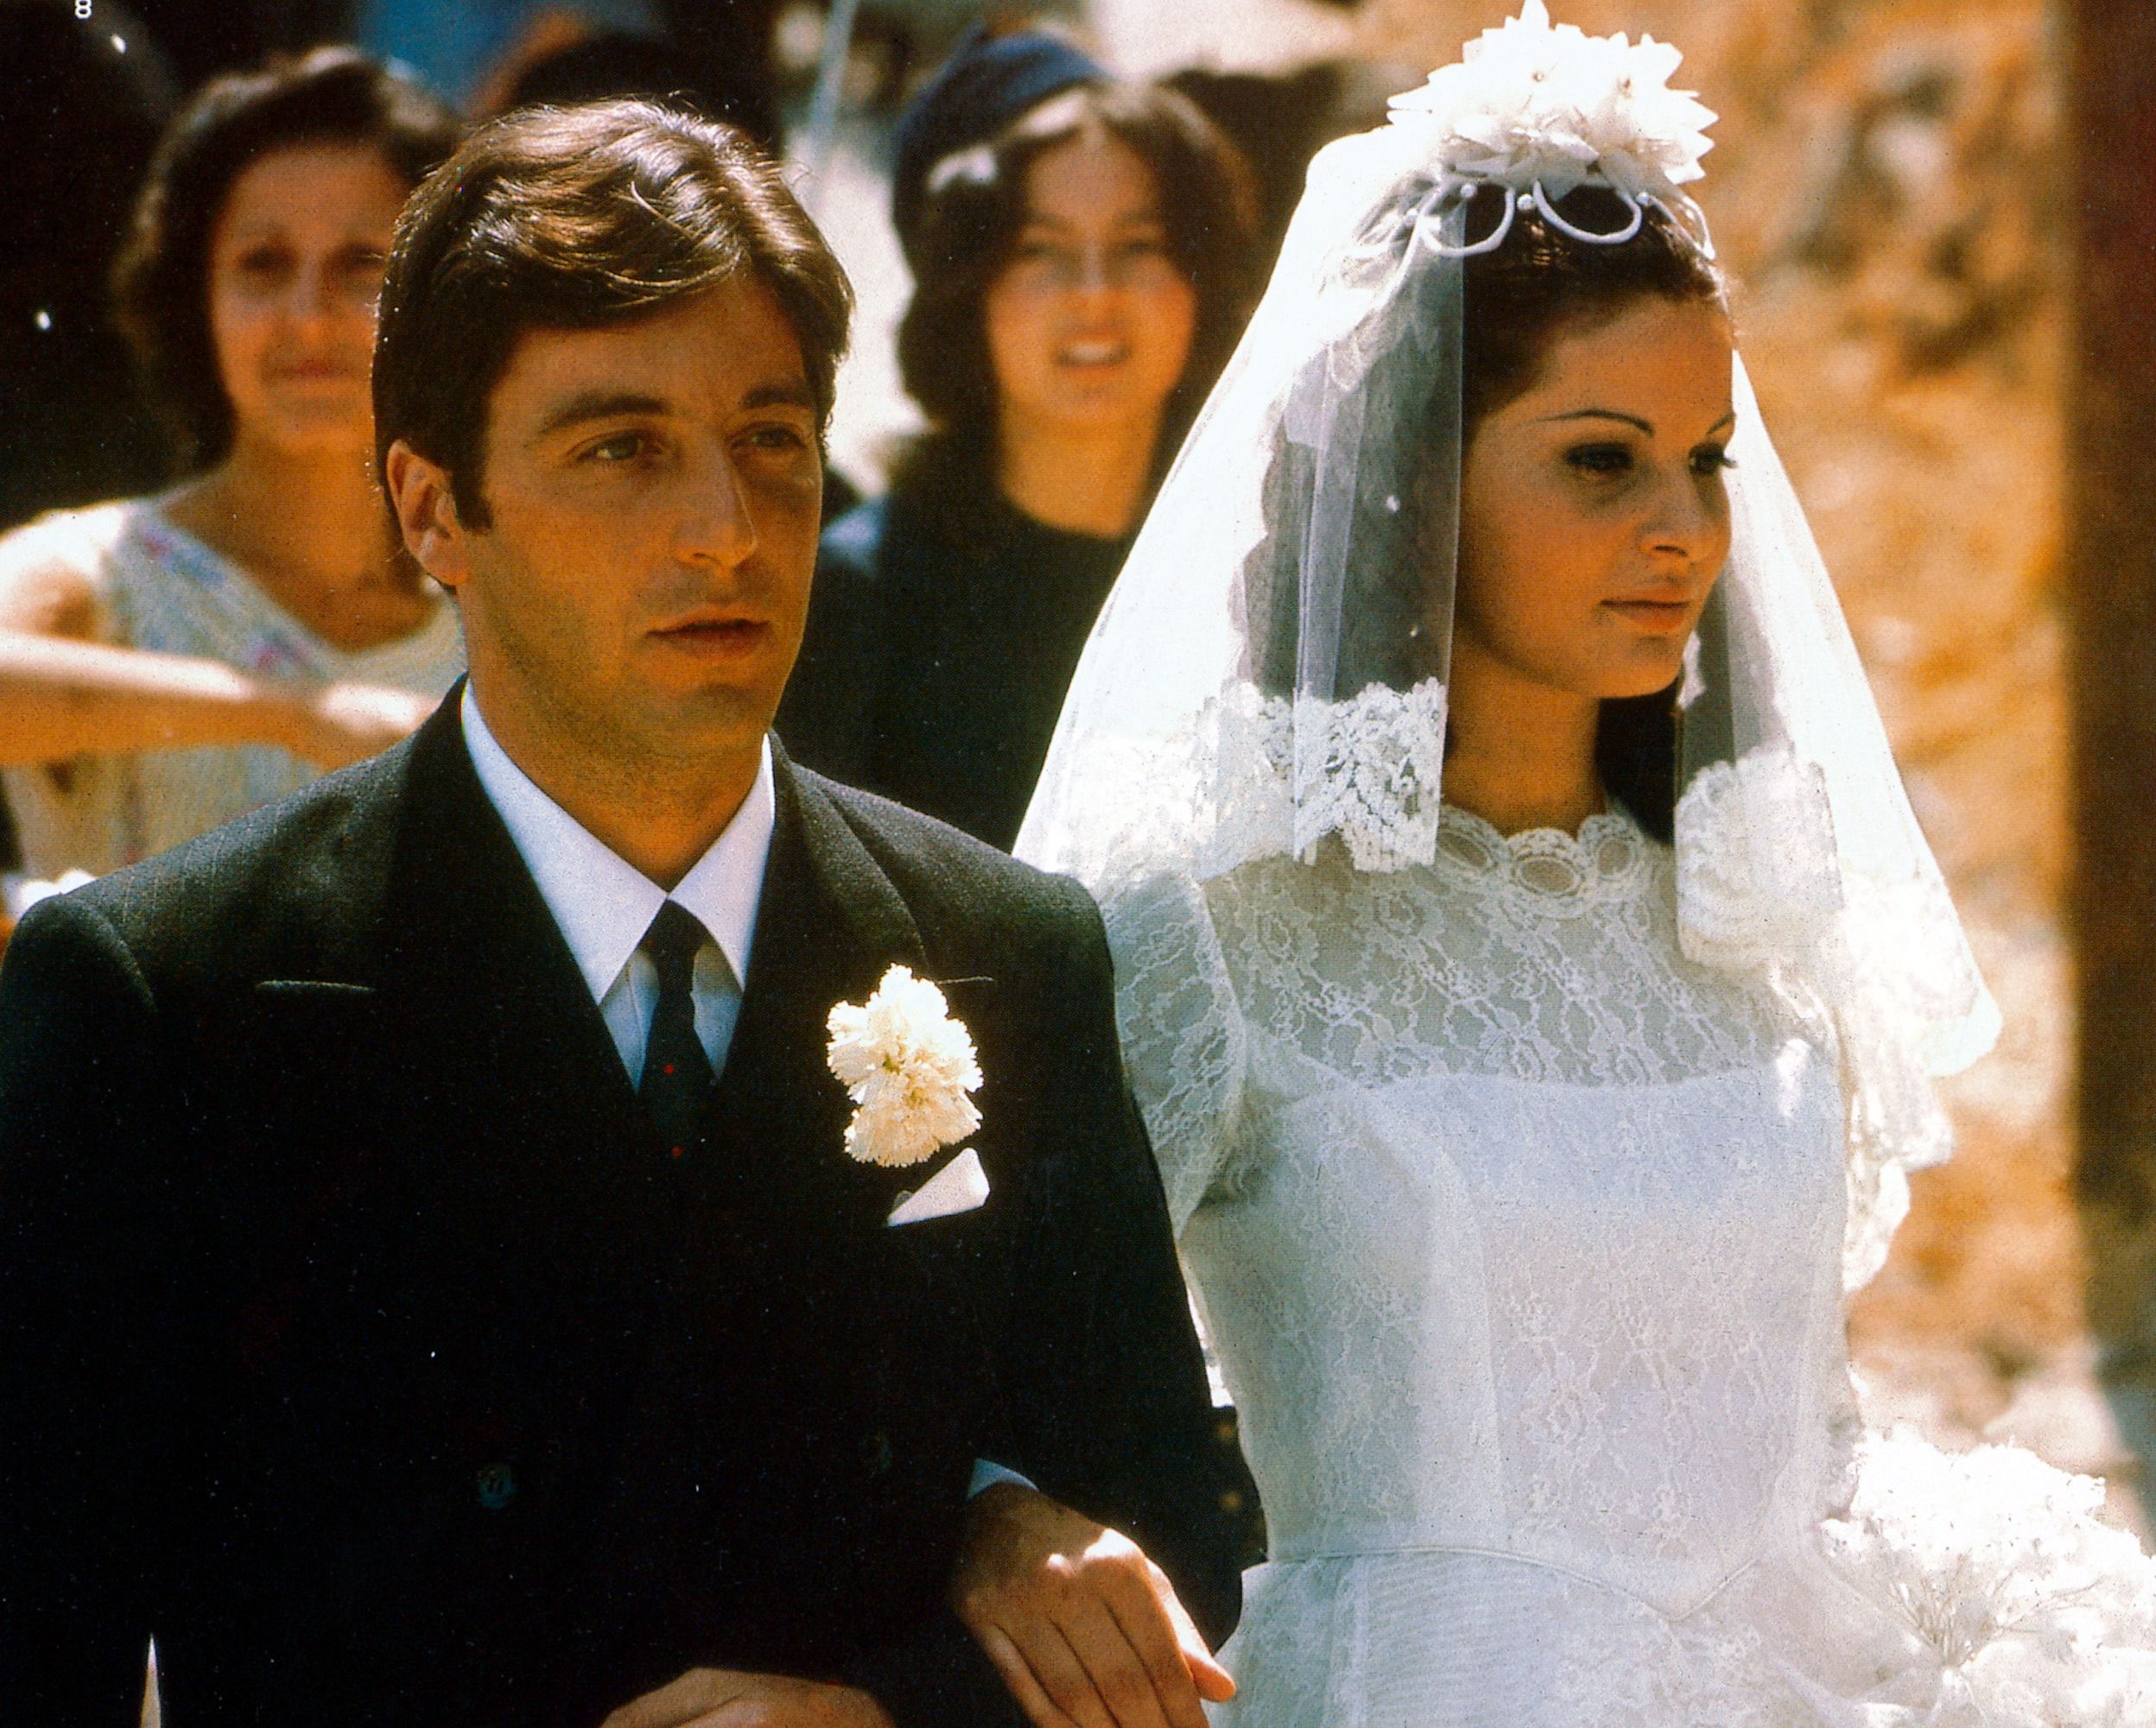 The Best Celebrity Wedding Dresses From the Last 100 Years